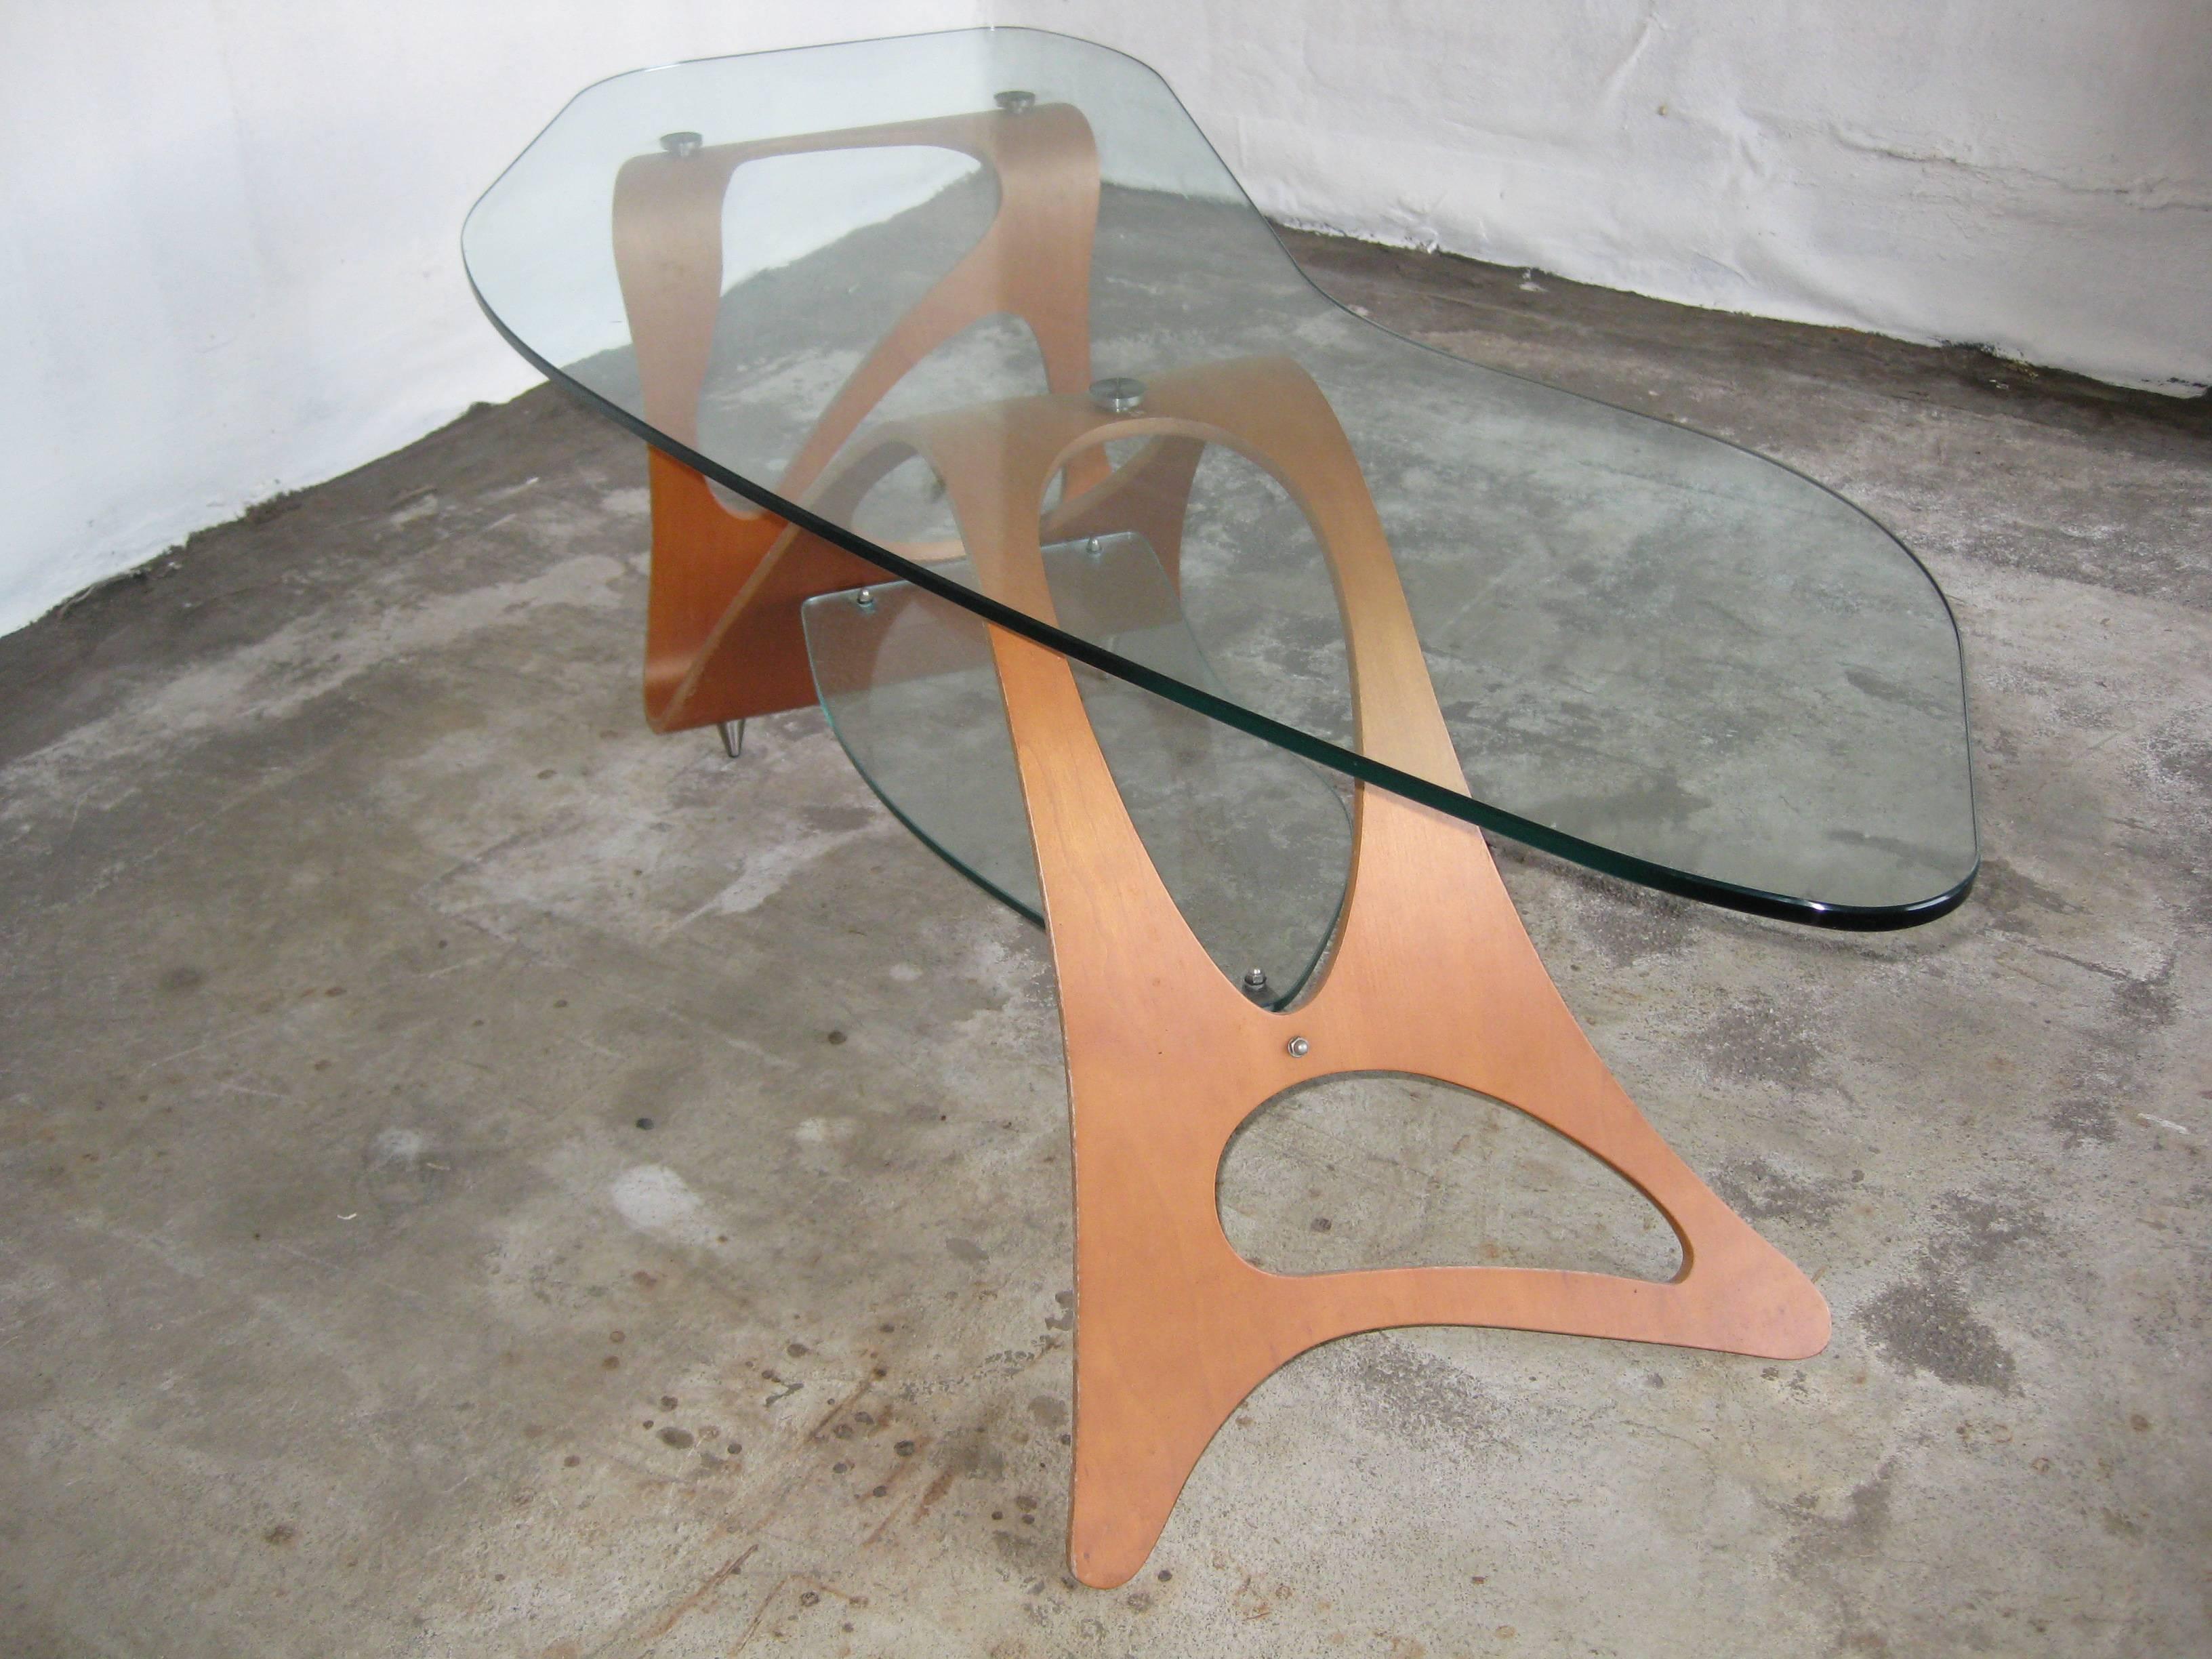 Arabesco coffee table design by Carlo Mollino 1949 for the living room of Casa Orenga in Turin.
Plywooly wood legs with glass top.
Original Zanotta production. 
 Manufacture logo in the wooden base.